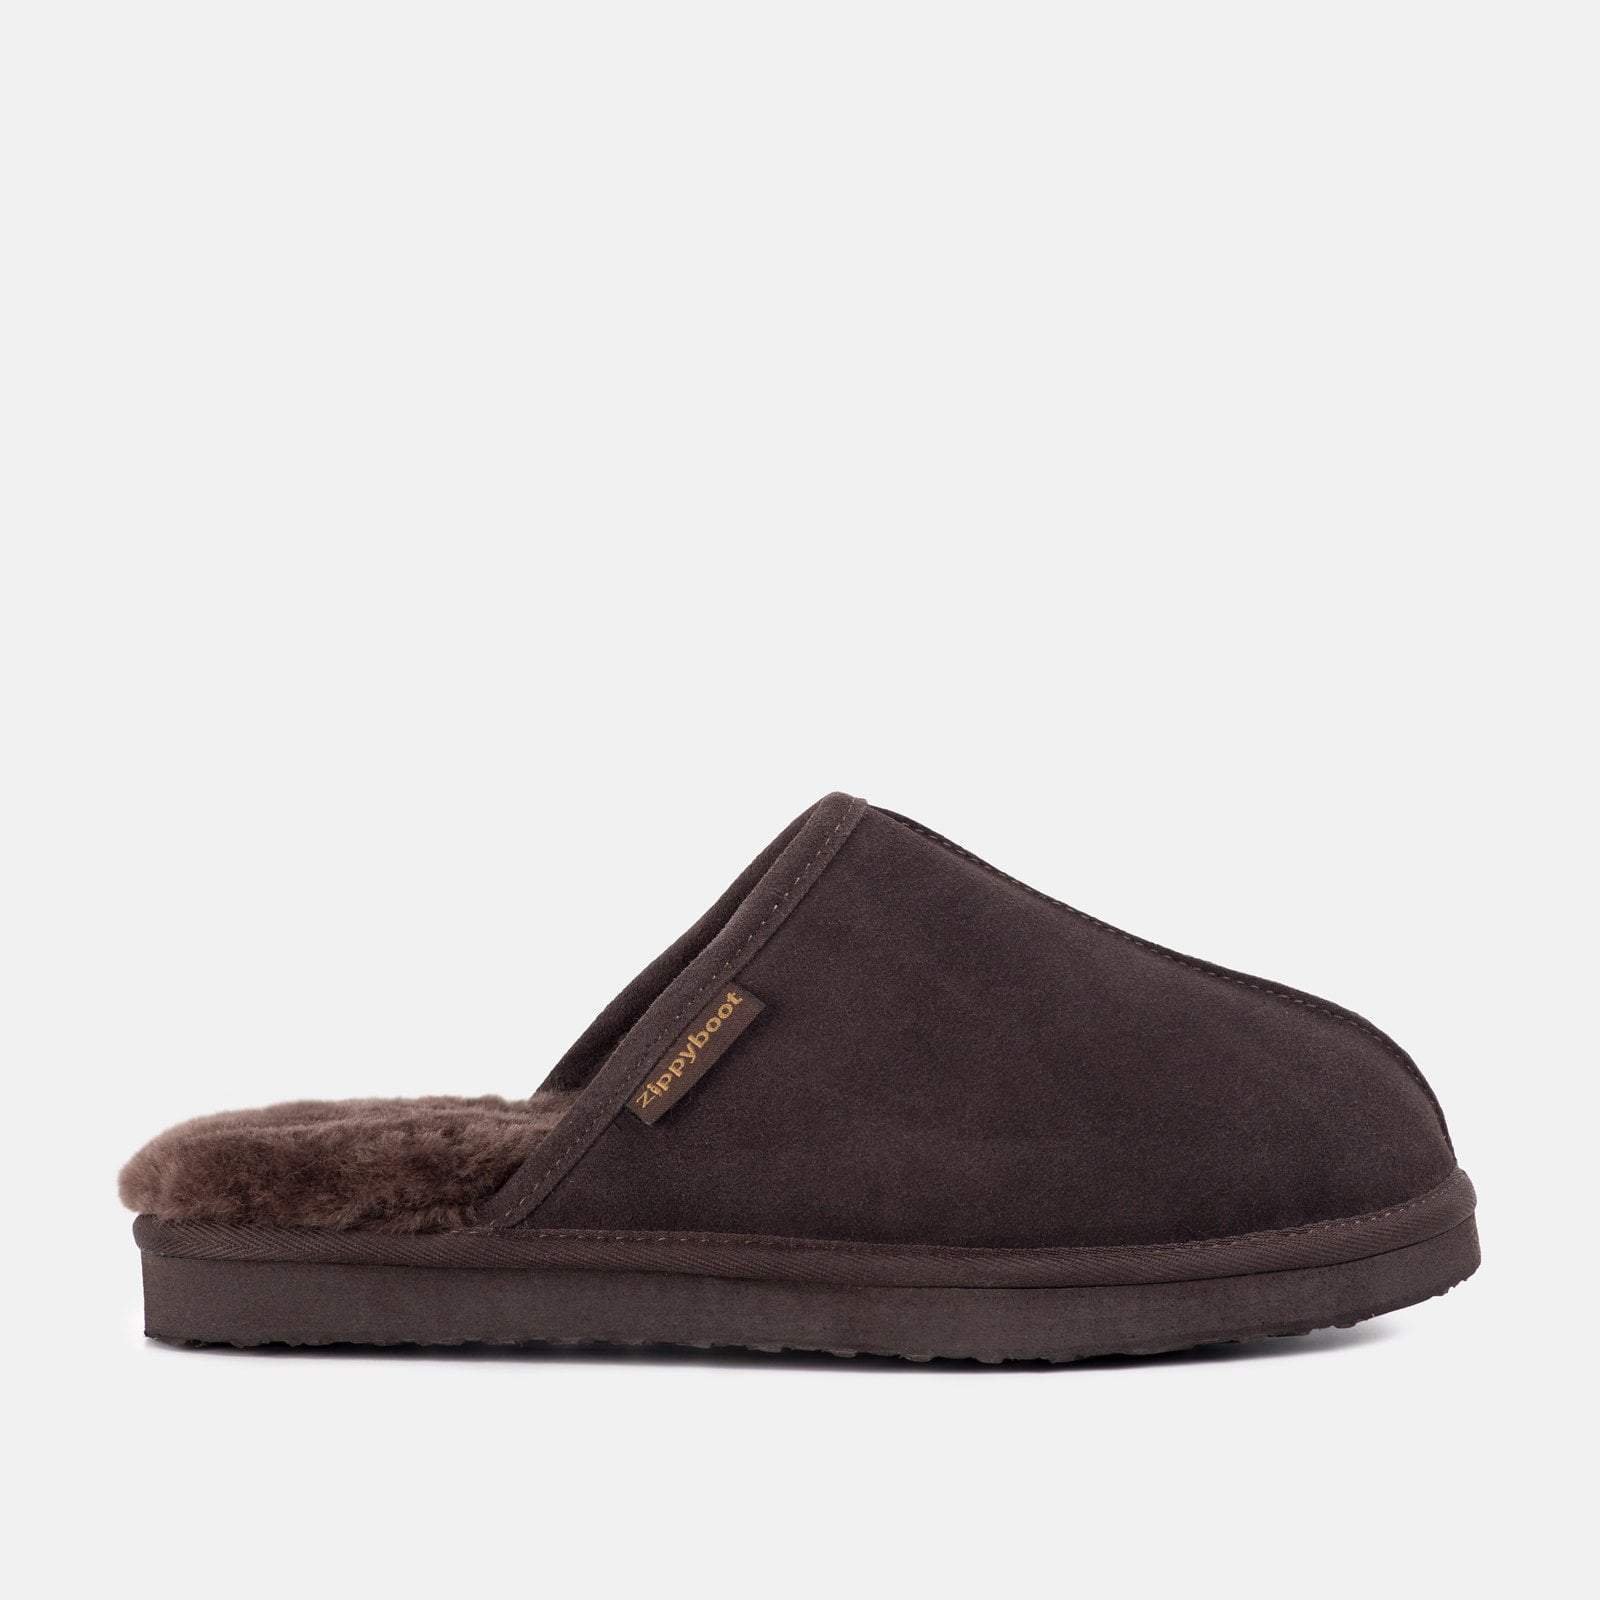 Redfootshoes: REDFOOT SALE 🔥 NEW SHEEPSKIN SLIPPERS NOW IN STOCK ...